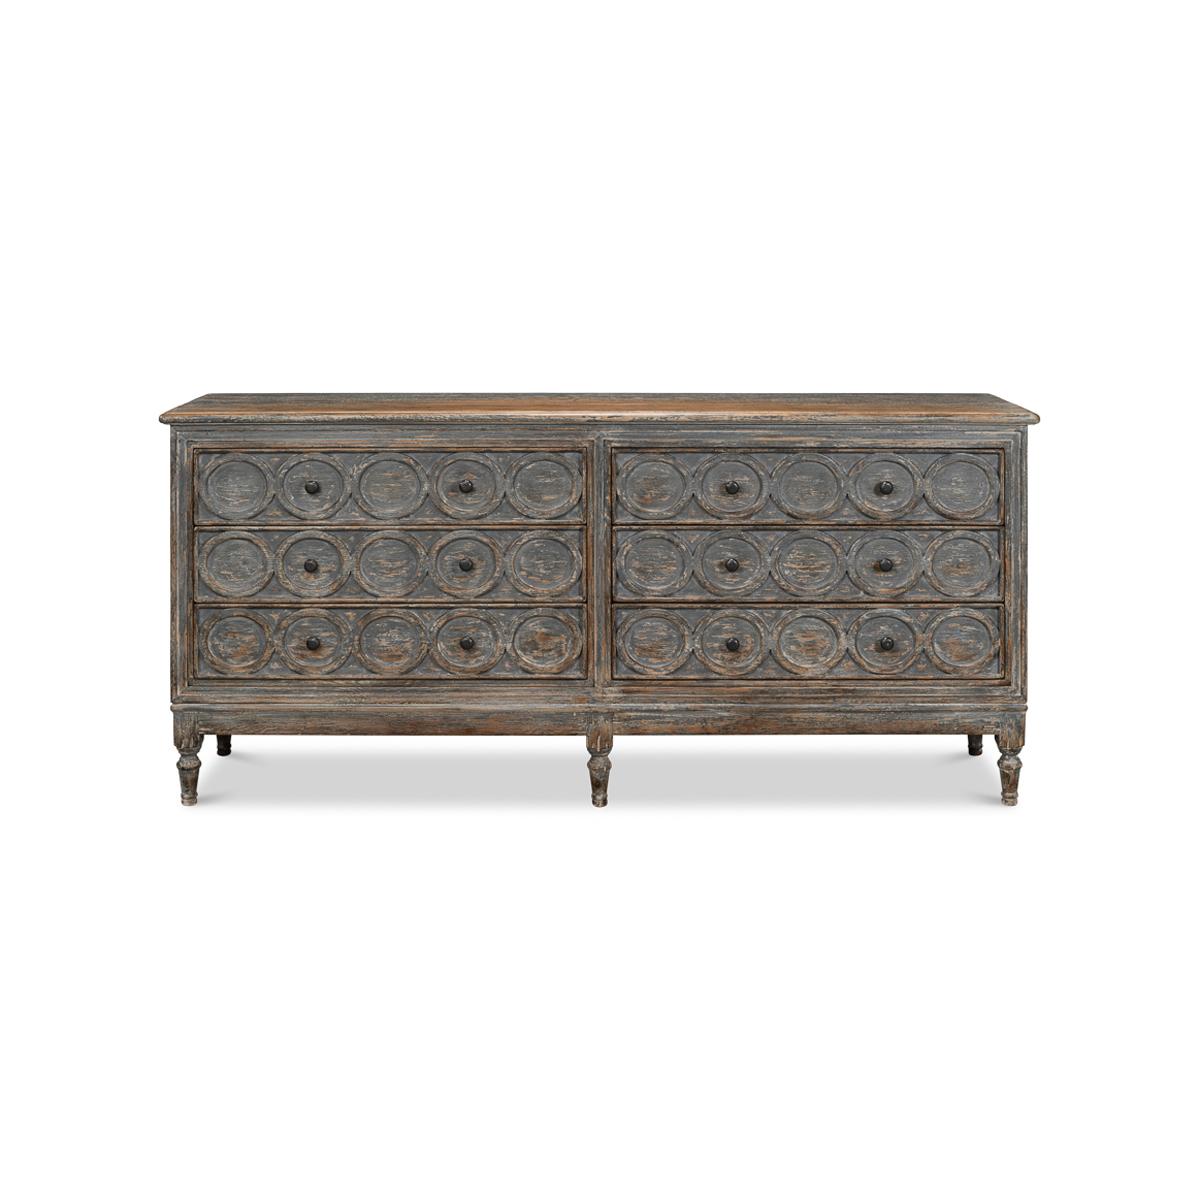 A six-drawer dresser that is highly distressed with circle motif's interlaced on the drawer fronts. Raised on size turned and tapered legs.

Dimensions: 80